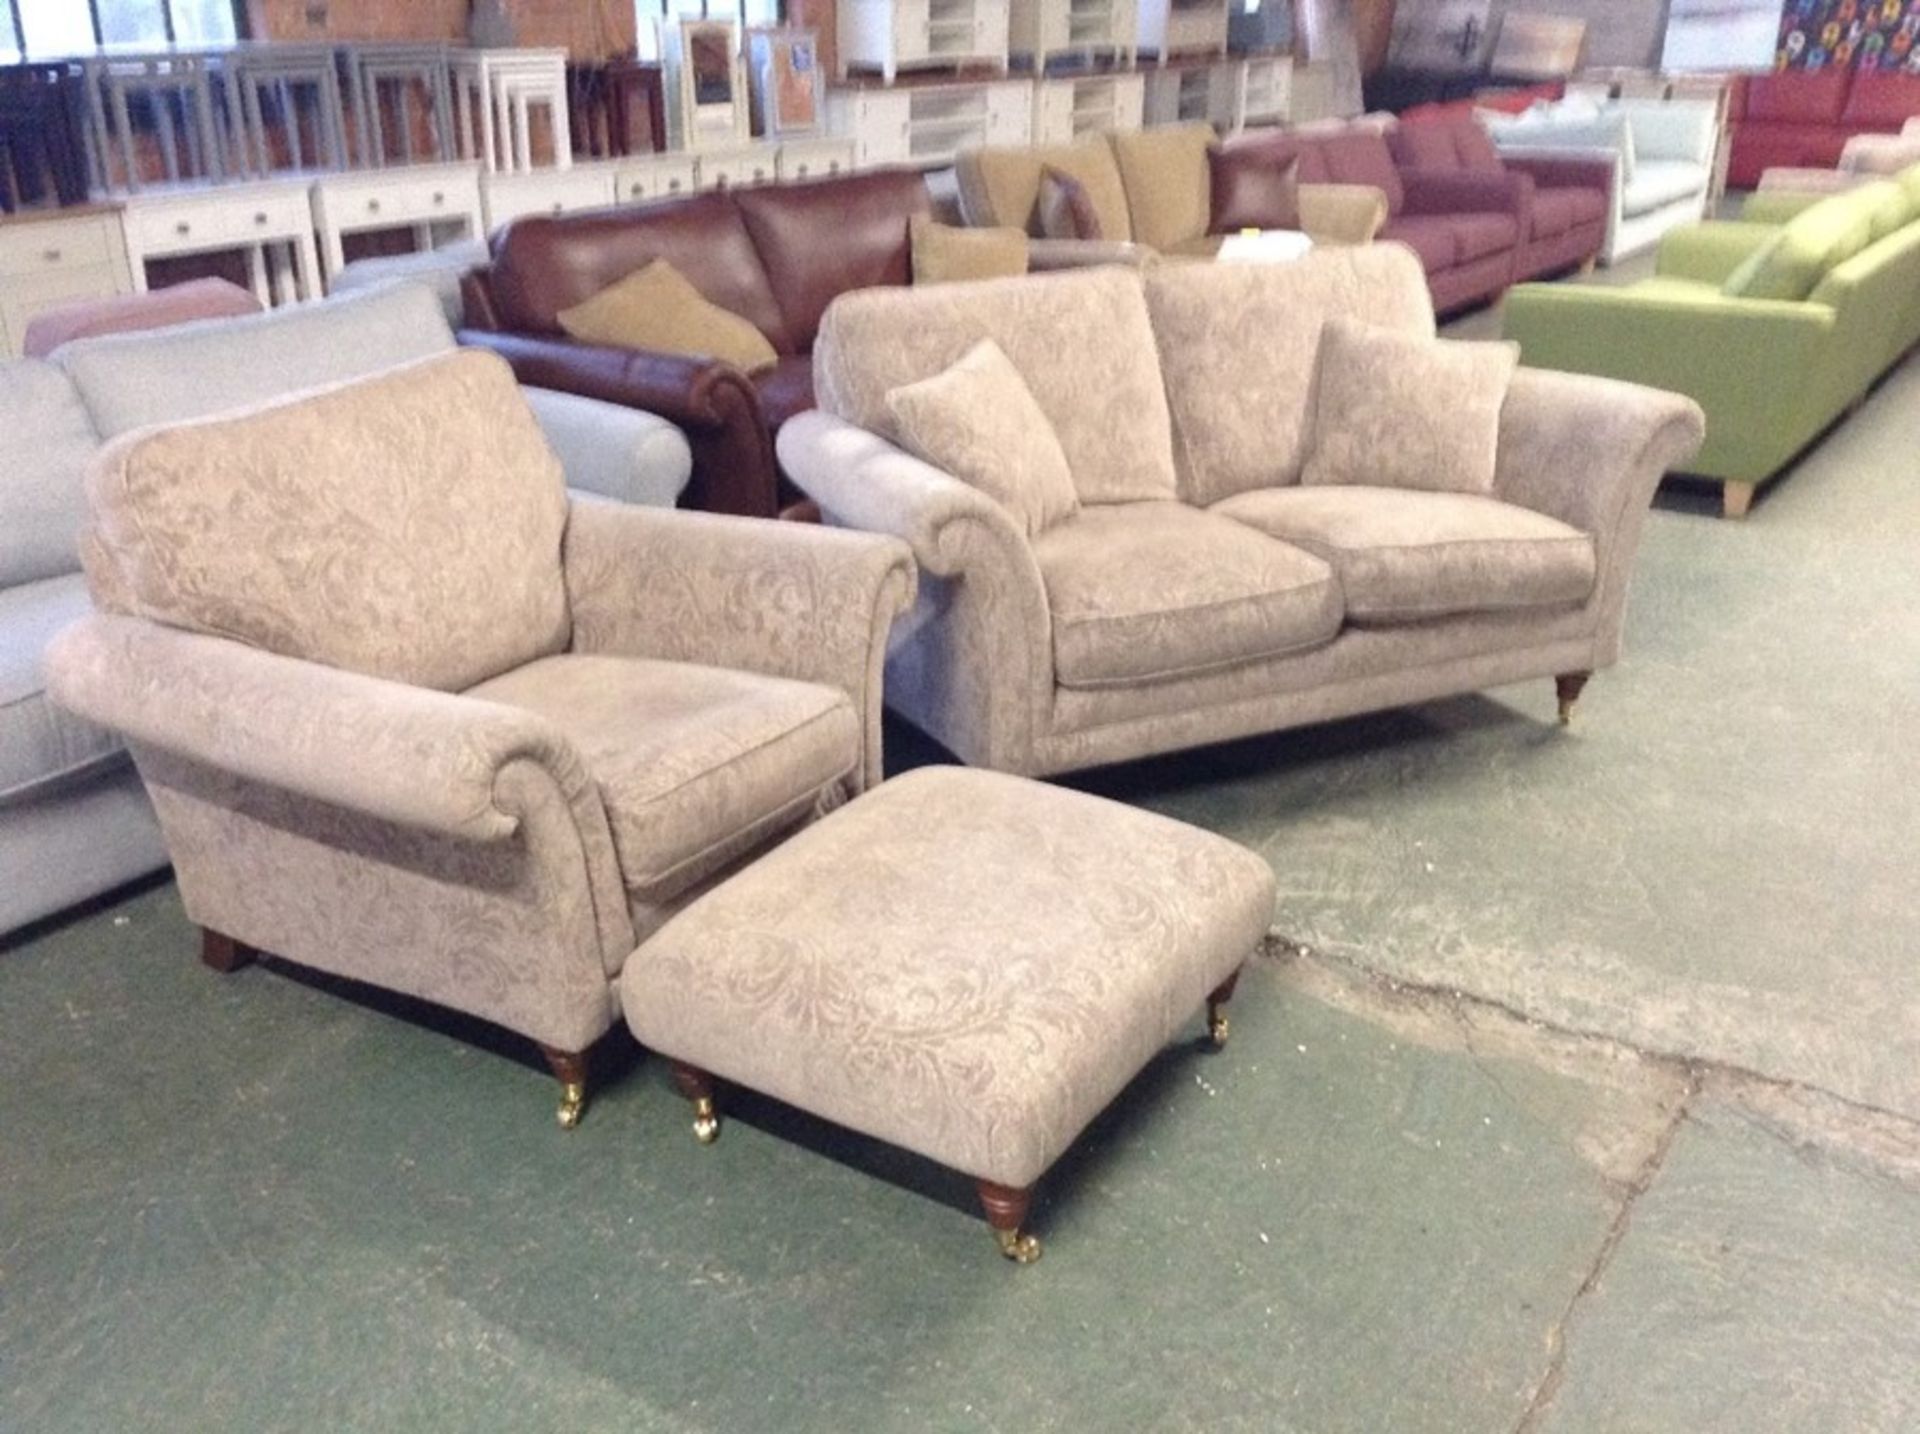 BEIGE FLORAL PATTERENED 2 SEATER SOFA, CHAIR & FOO